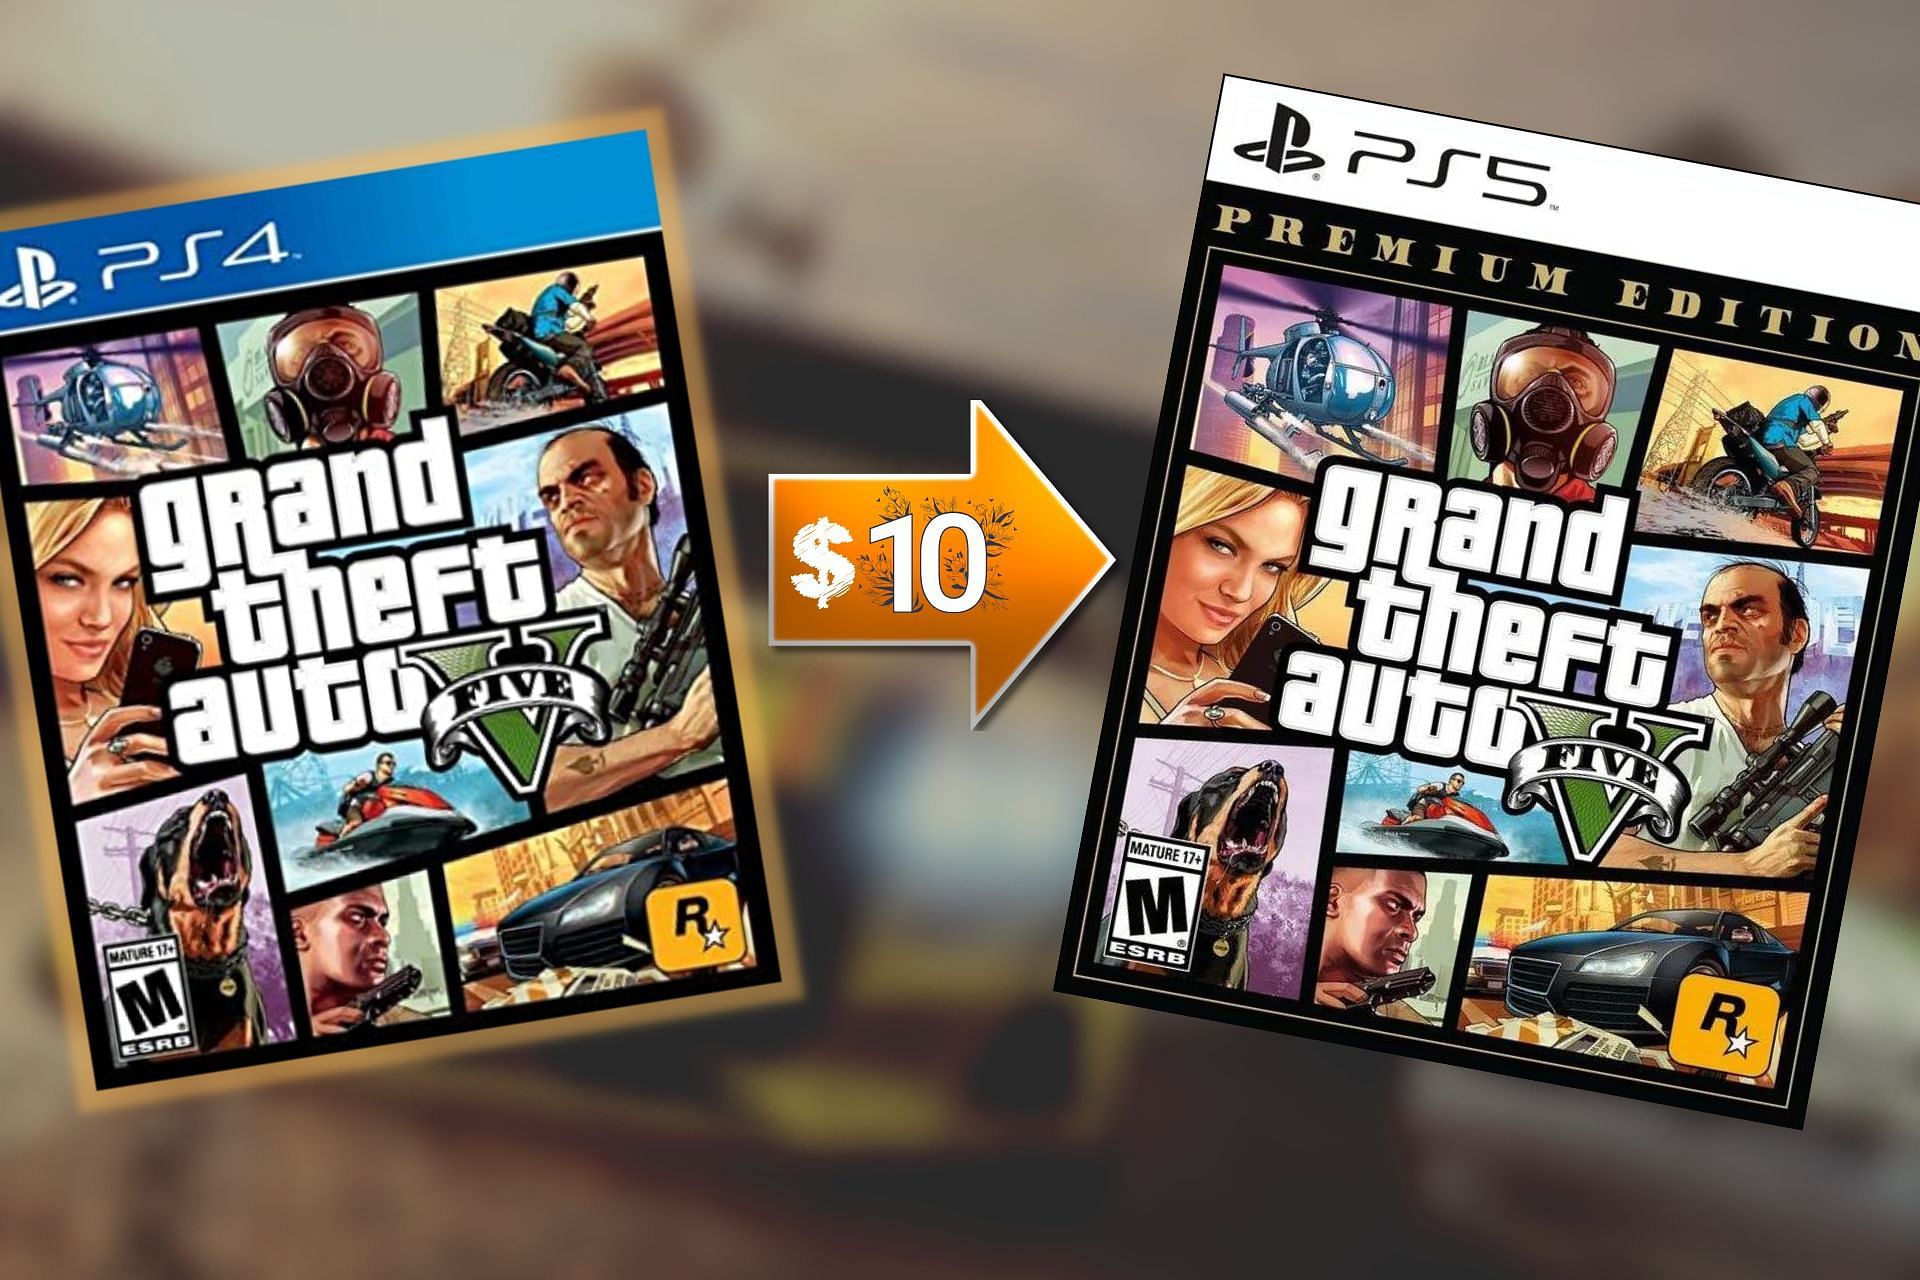 GTA 5 players on PS4 upgrade PS5 edition for $10